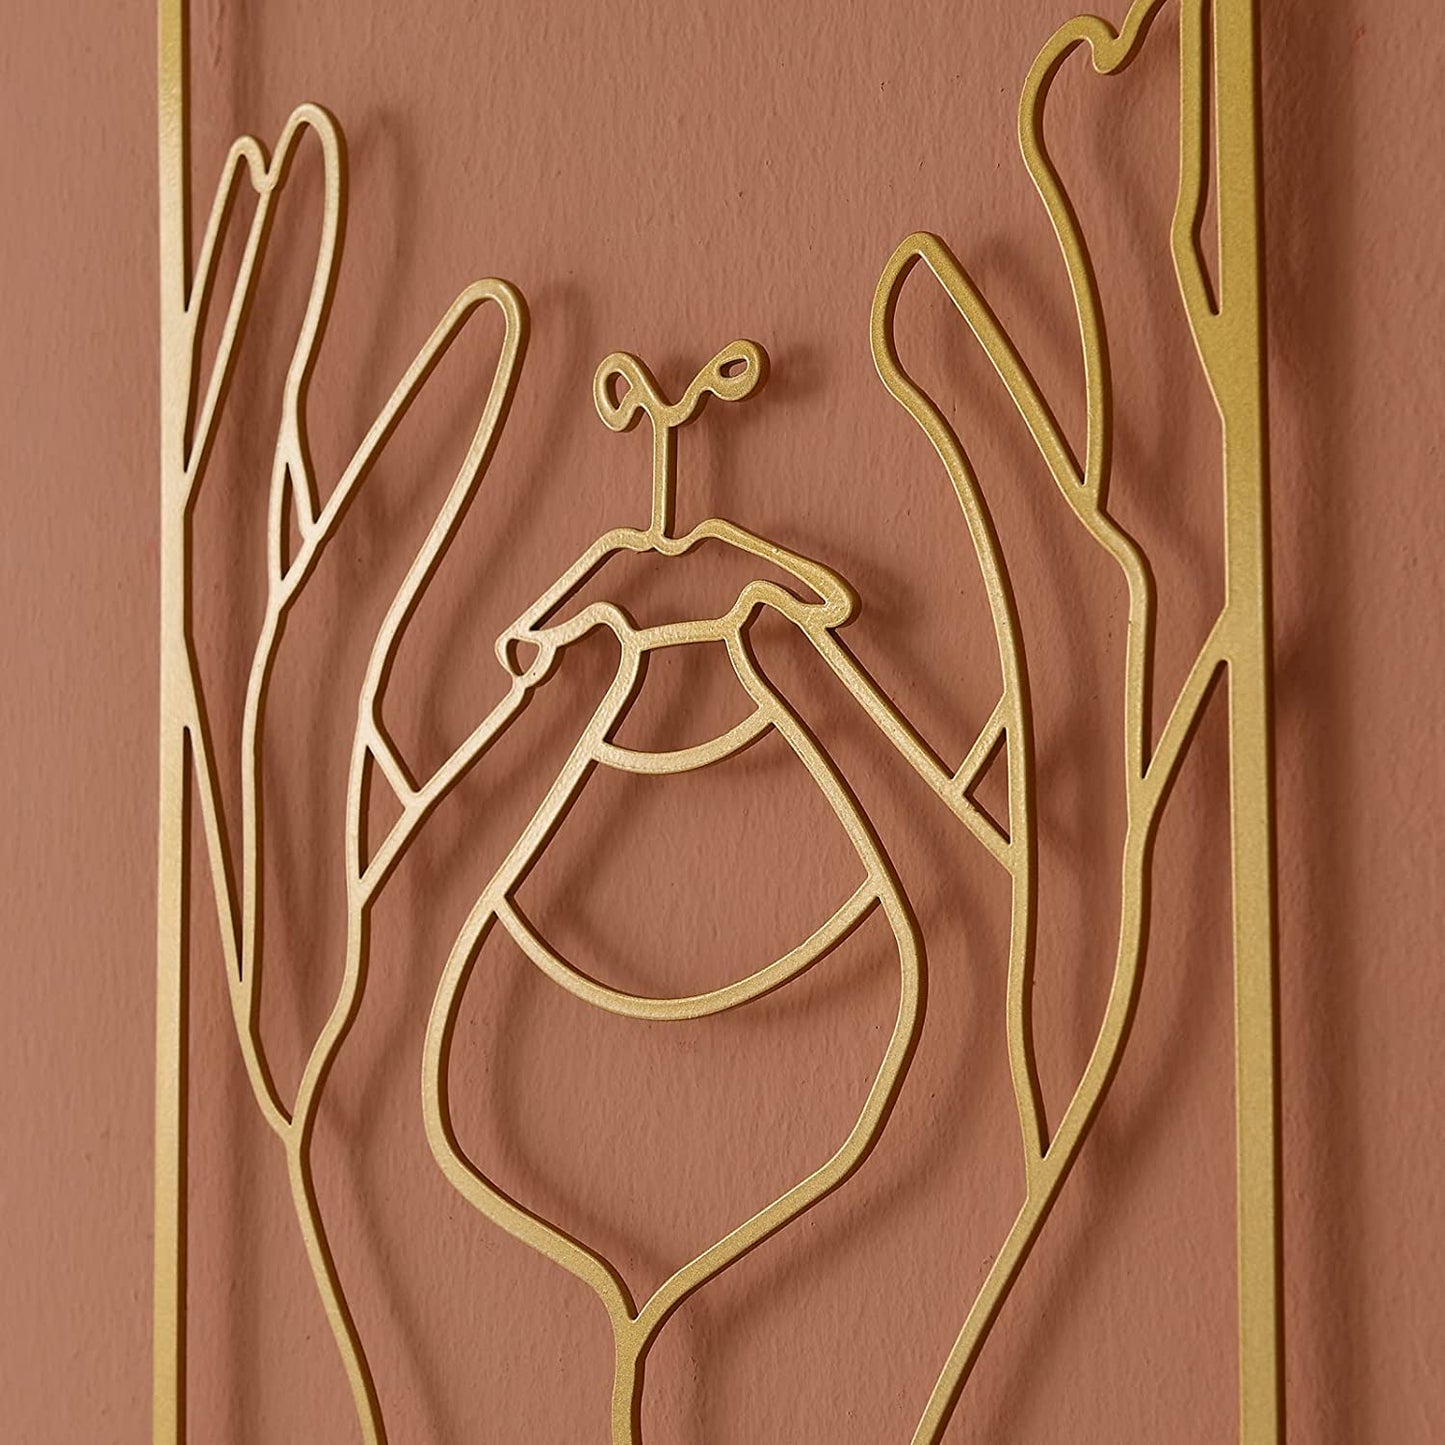 Modern Abstract Female Gold Line Silhouette Metal Art │ Nordic Woman Iron Wall Hanging Decor Ornament Besontique Home Decor Interior